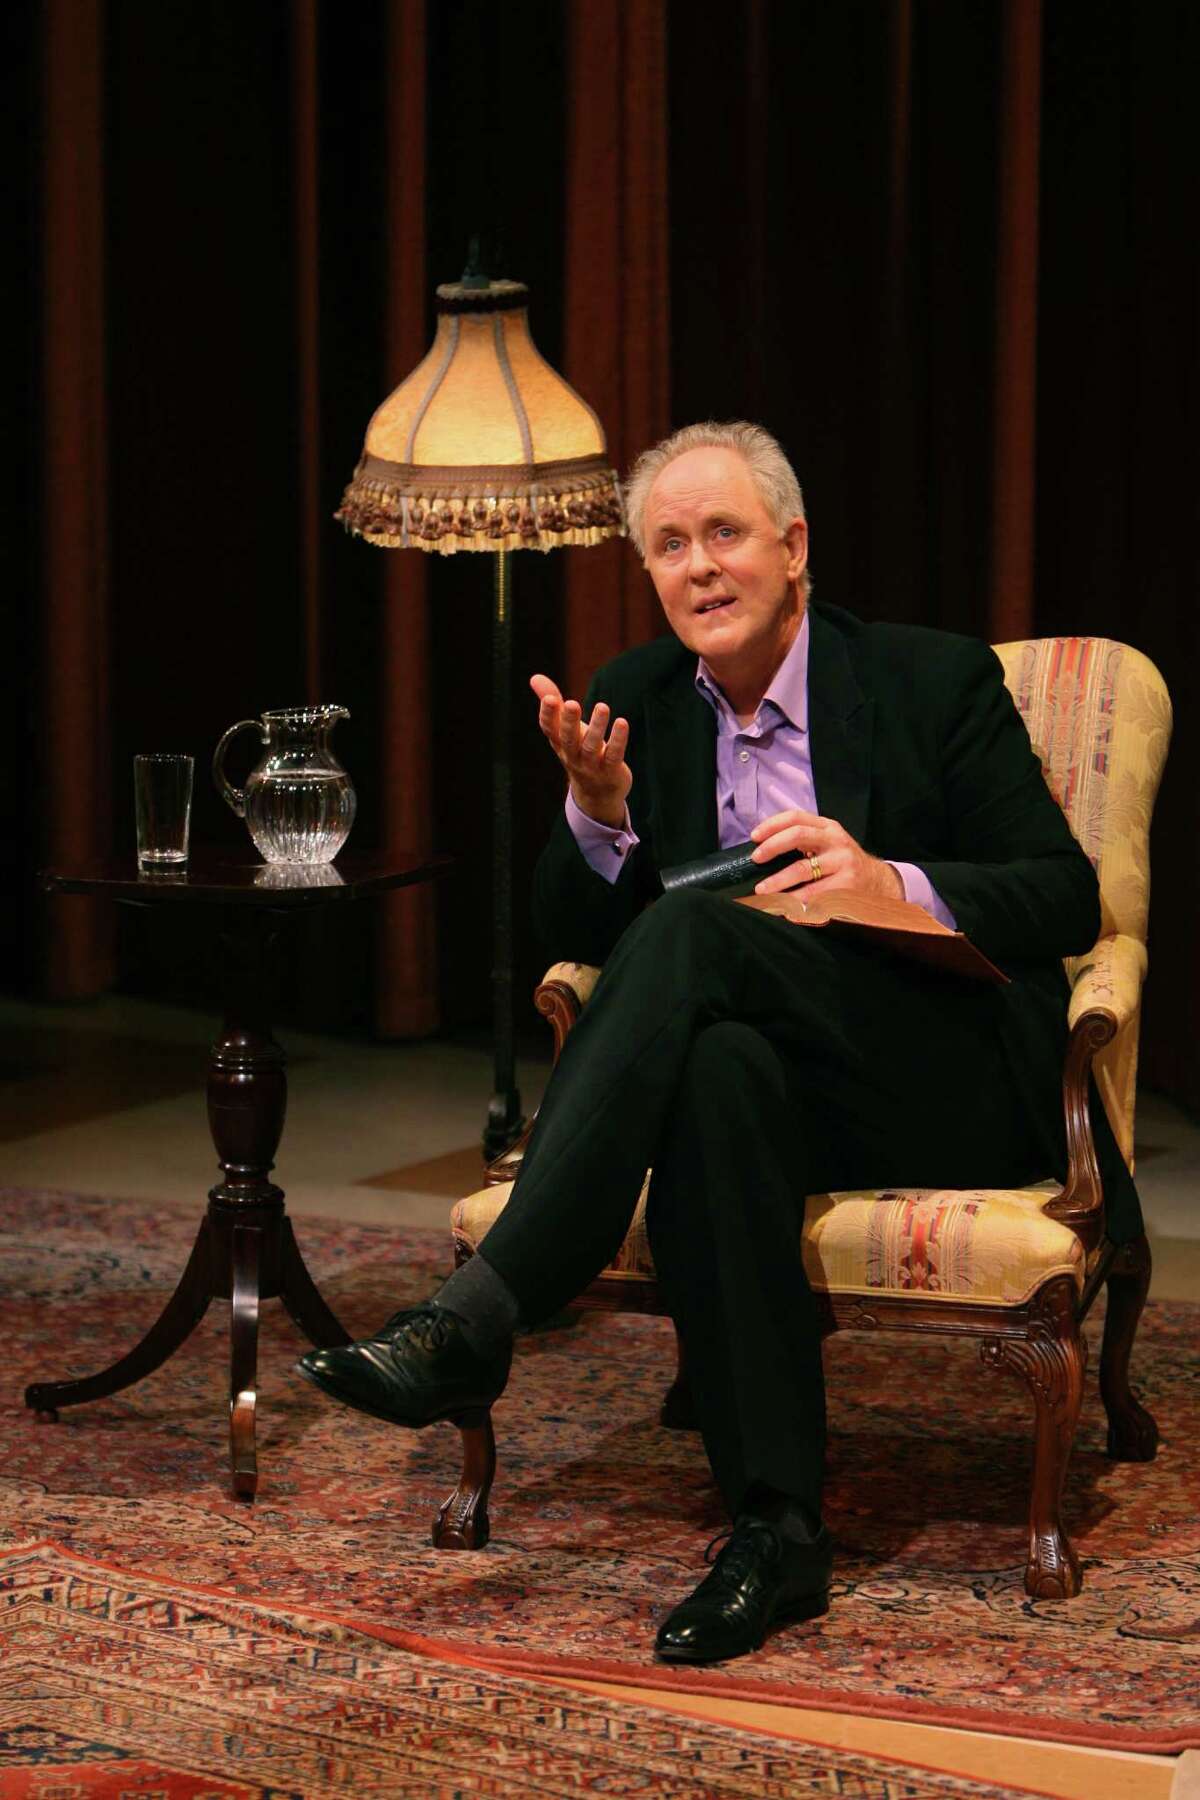 Two-time Oscar nominee John Lithgow reflects on storytelling as the tie that binds humanity in his one-man show, "Stories by Heart," which will be presented Friday, Nov. 15, 2013, at the Regina A. Quick Center for the Performing Arts on the Fairfield University campus.